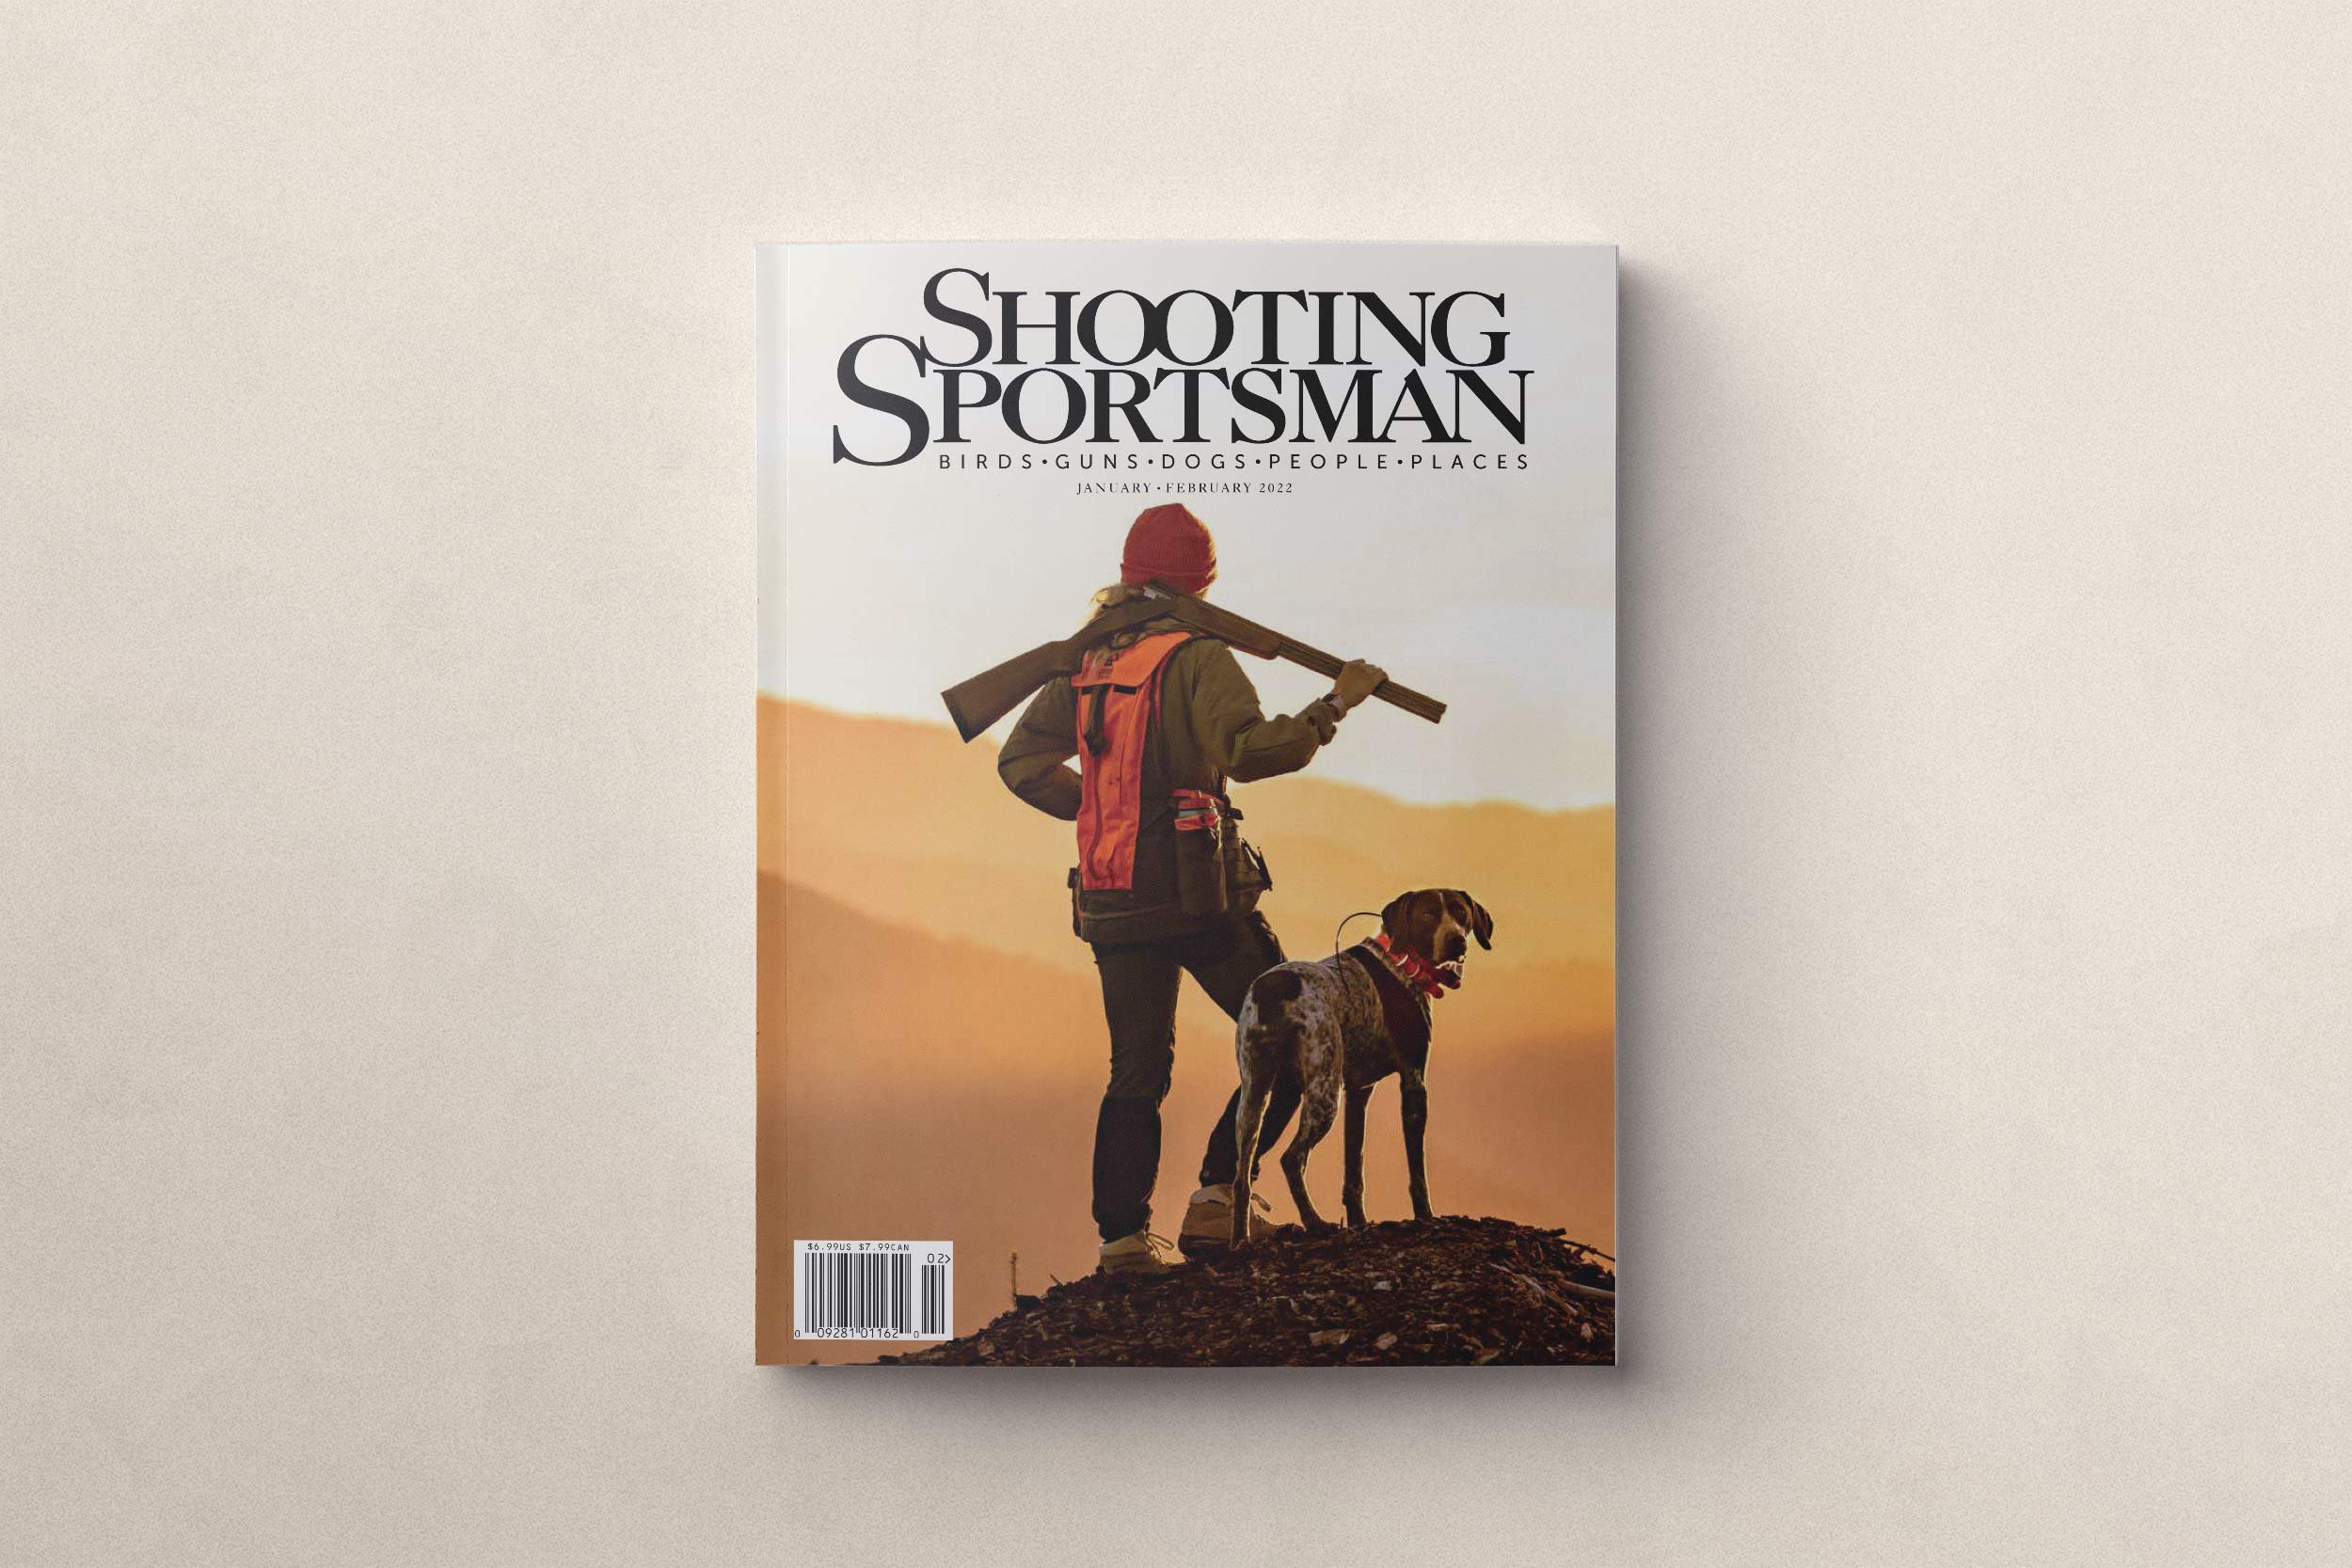 Shooting-Sportsman-The-Guide's-Life-cover.jpg